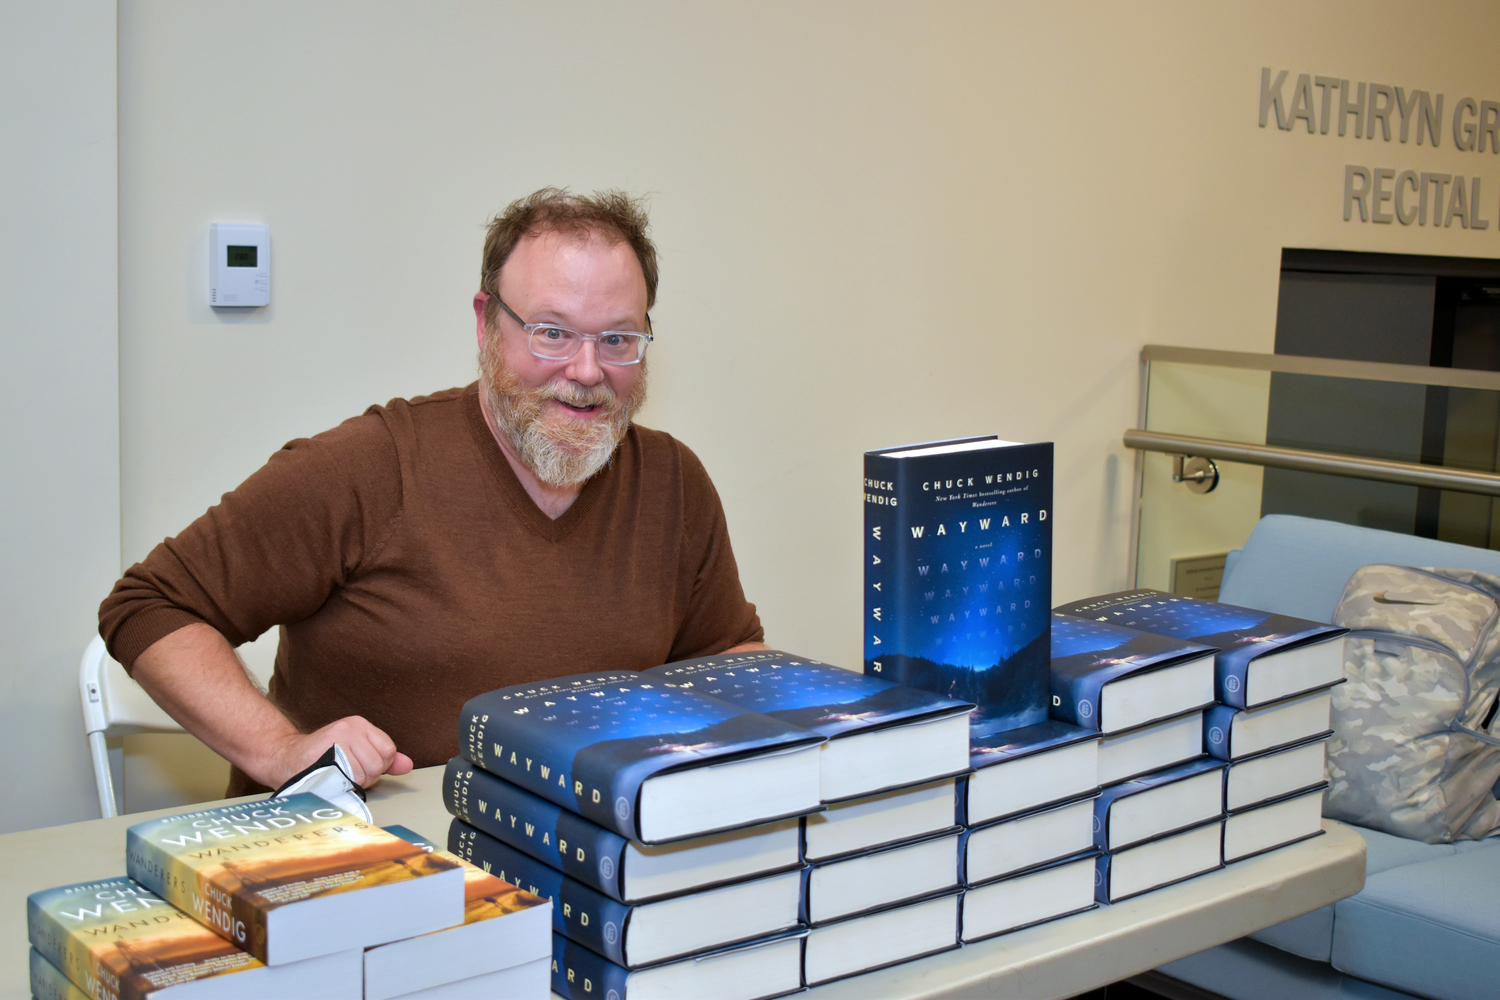 Best-selling Author Chuck Wendig '98 Says It's About More Than Writing